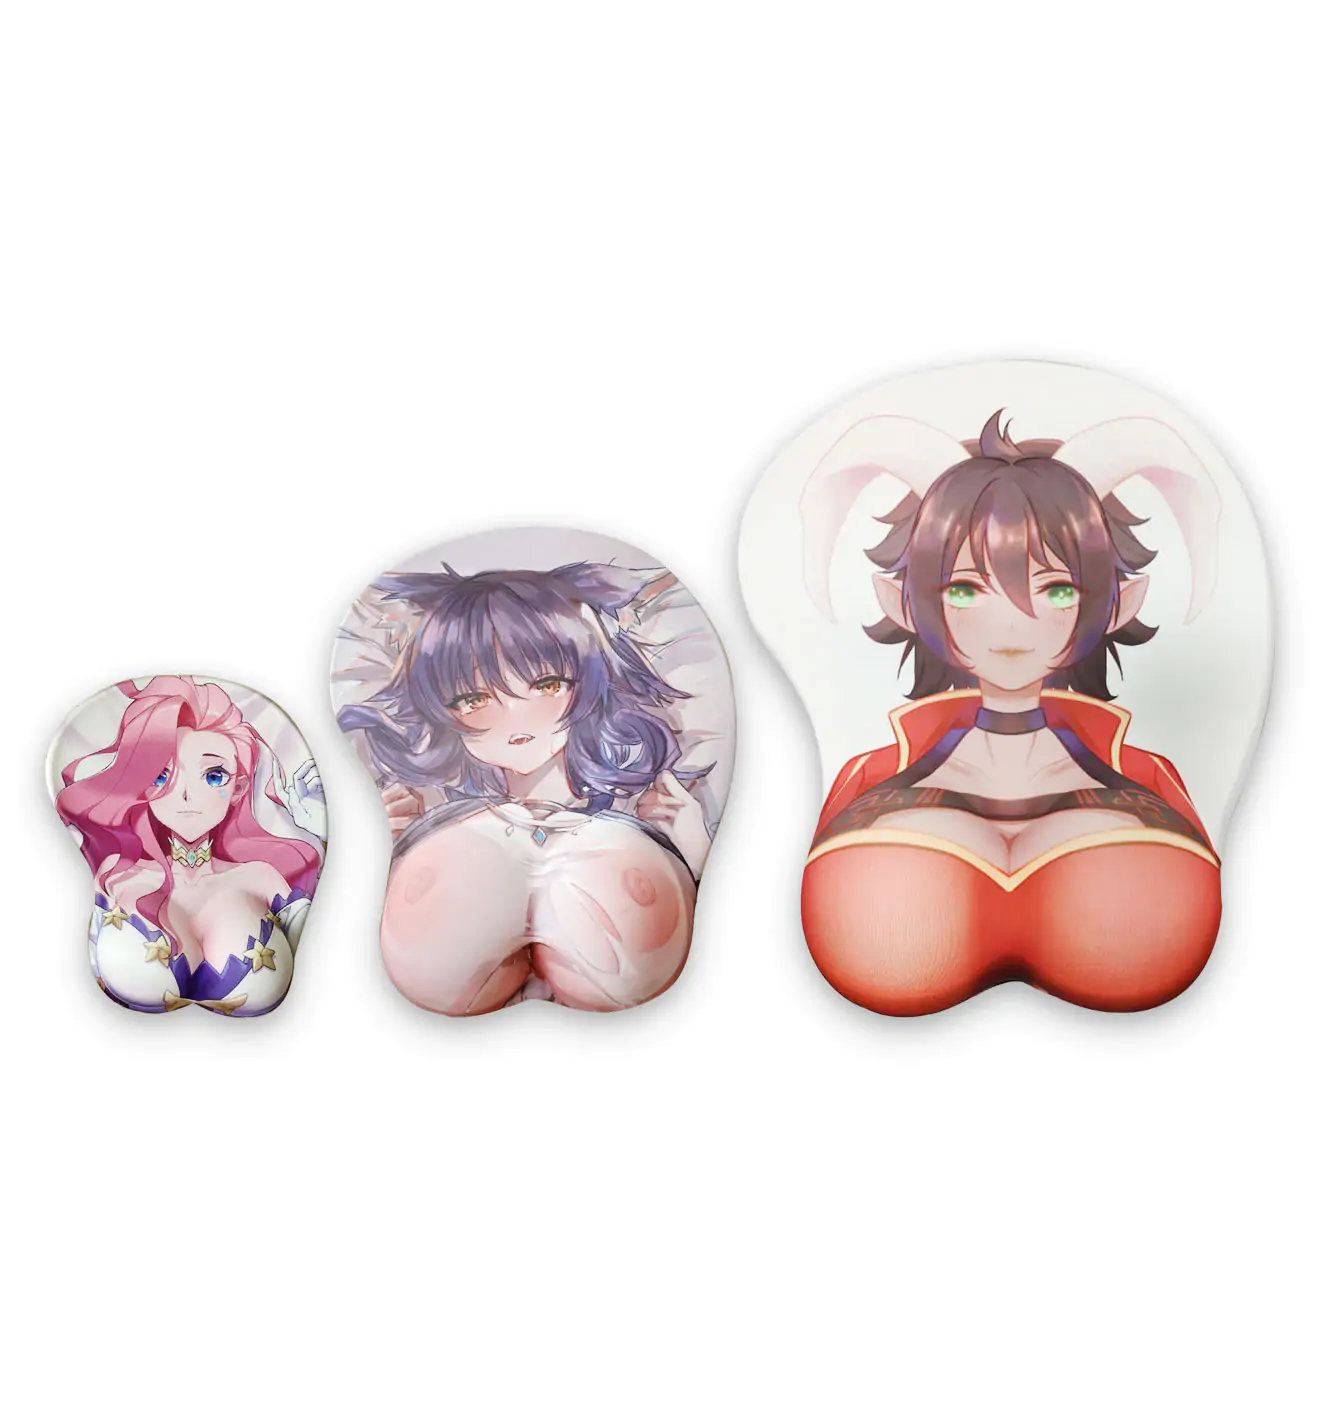 pink double ponytail girl life size oppai mousepad 1370 - Boobie Mouse Pad